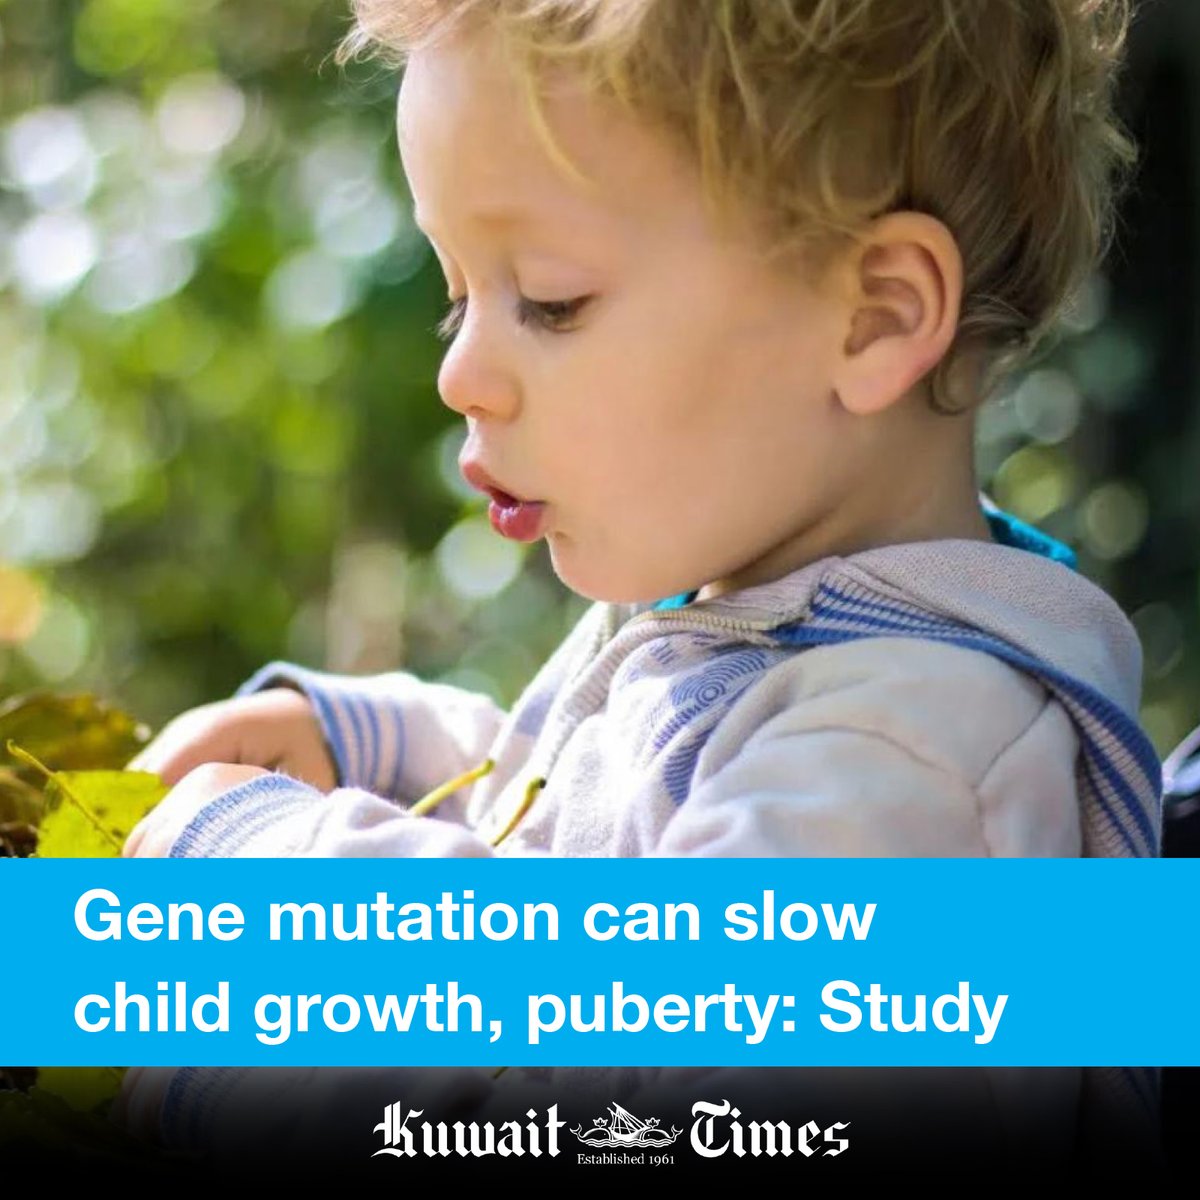 Scientists have identified a gene mutation that affects the brain's ability to sense a body's nutrition and can impact childhood growth and delay puberty, a study said Wednesday.
#Scientists #genemutation #nutrition #Childhoodgrowth #MC3R
news.kuwaittimes.net/website/gene-m…